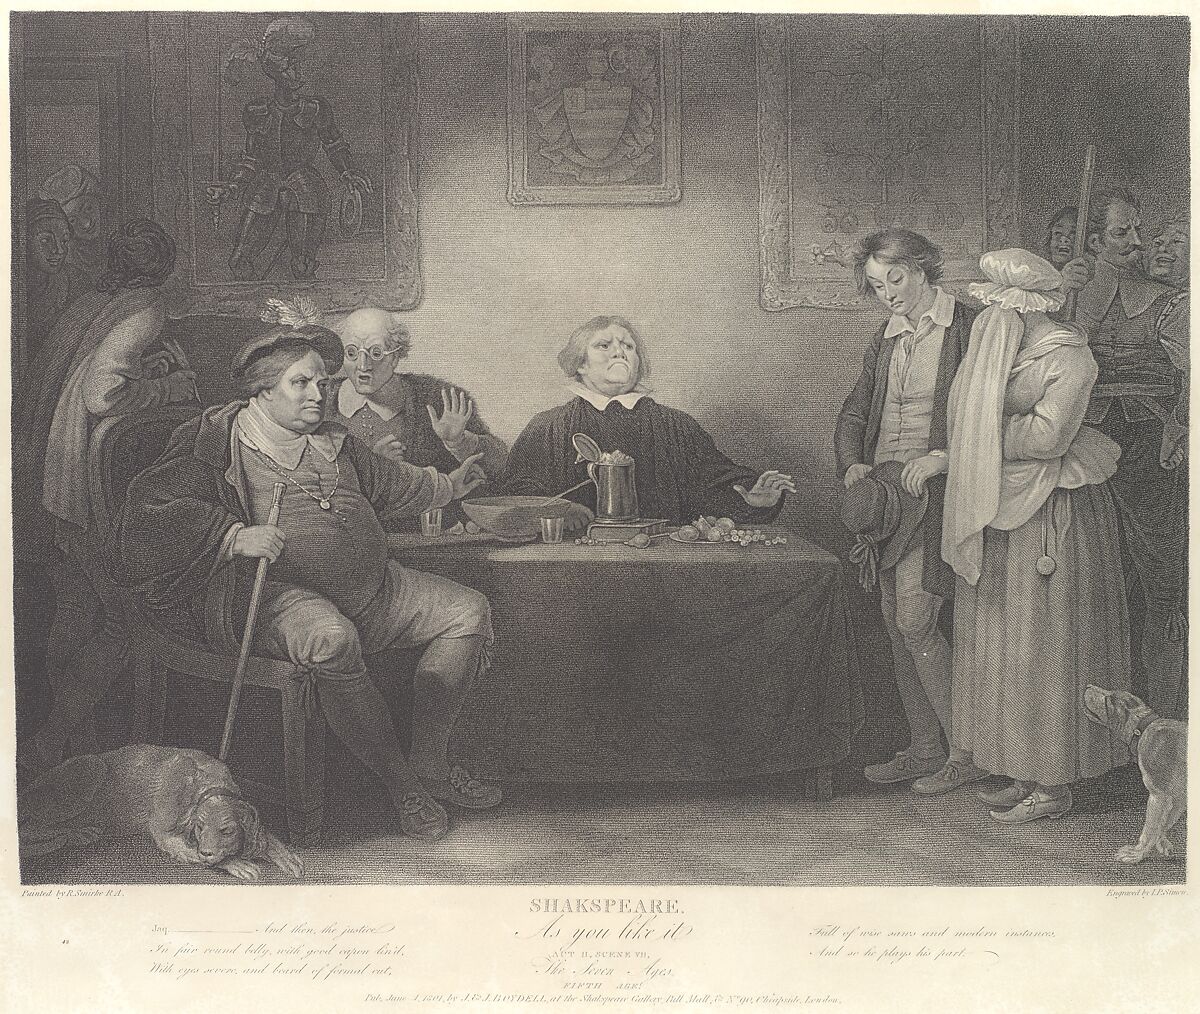 The Seven Ages, Fifth Age: The Justice (Shakespeare, As You Like It, Act 2, Scene 7), Peter Simon (British, London ca. 1764–1813 Paris), Stipple engraving 